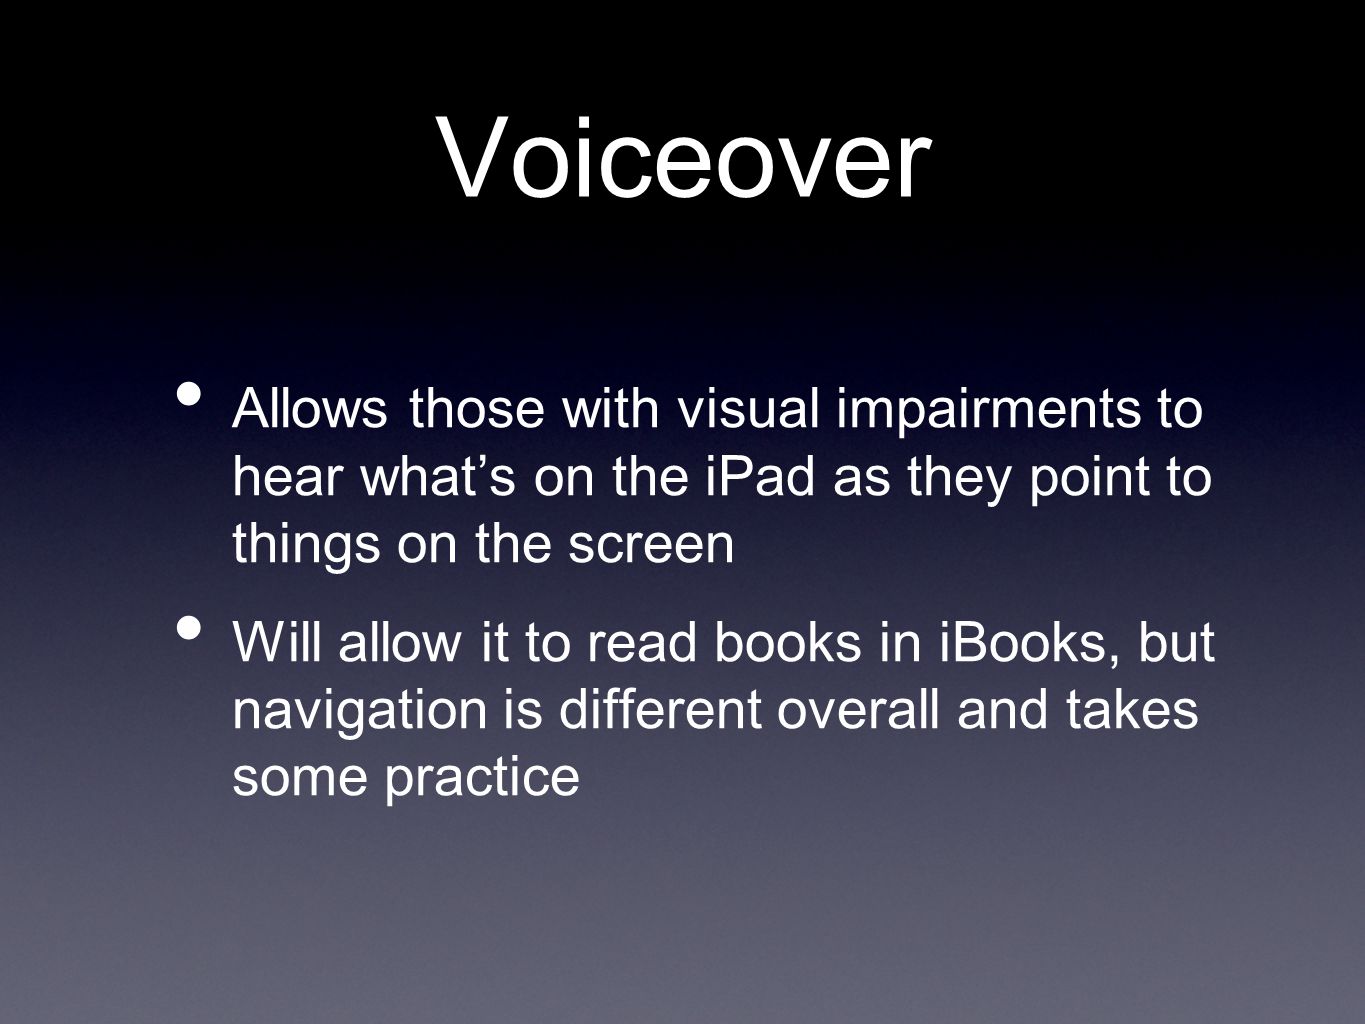 Voiceover Allows those with visual impairments to hear what’s on the iPad as they point to things on the screen Will allow it to read books in iBooks, but navigation is different overall and takes some practice